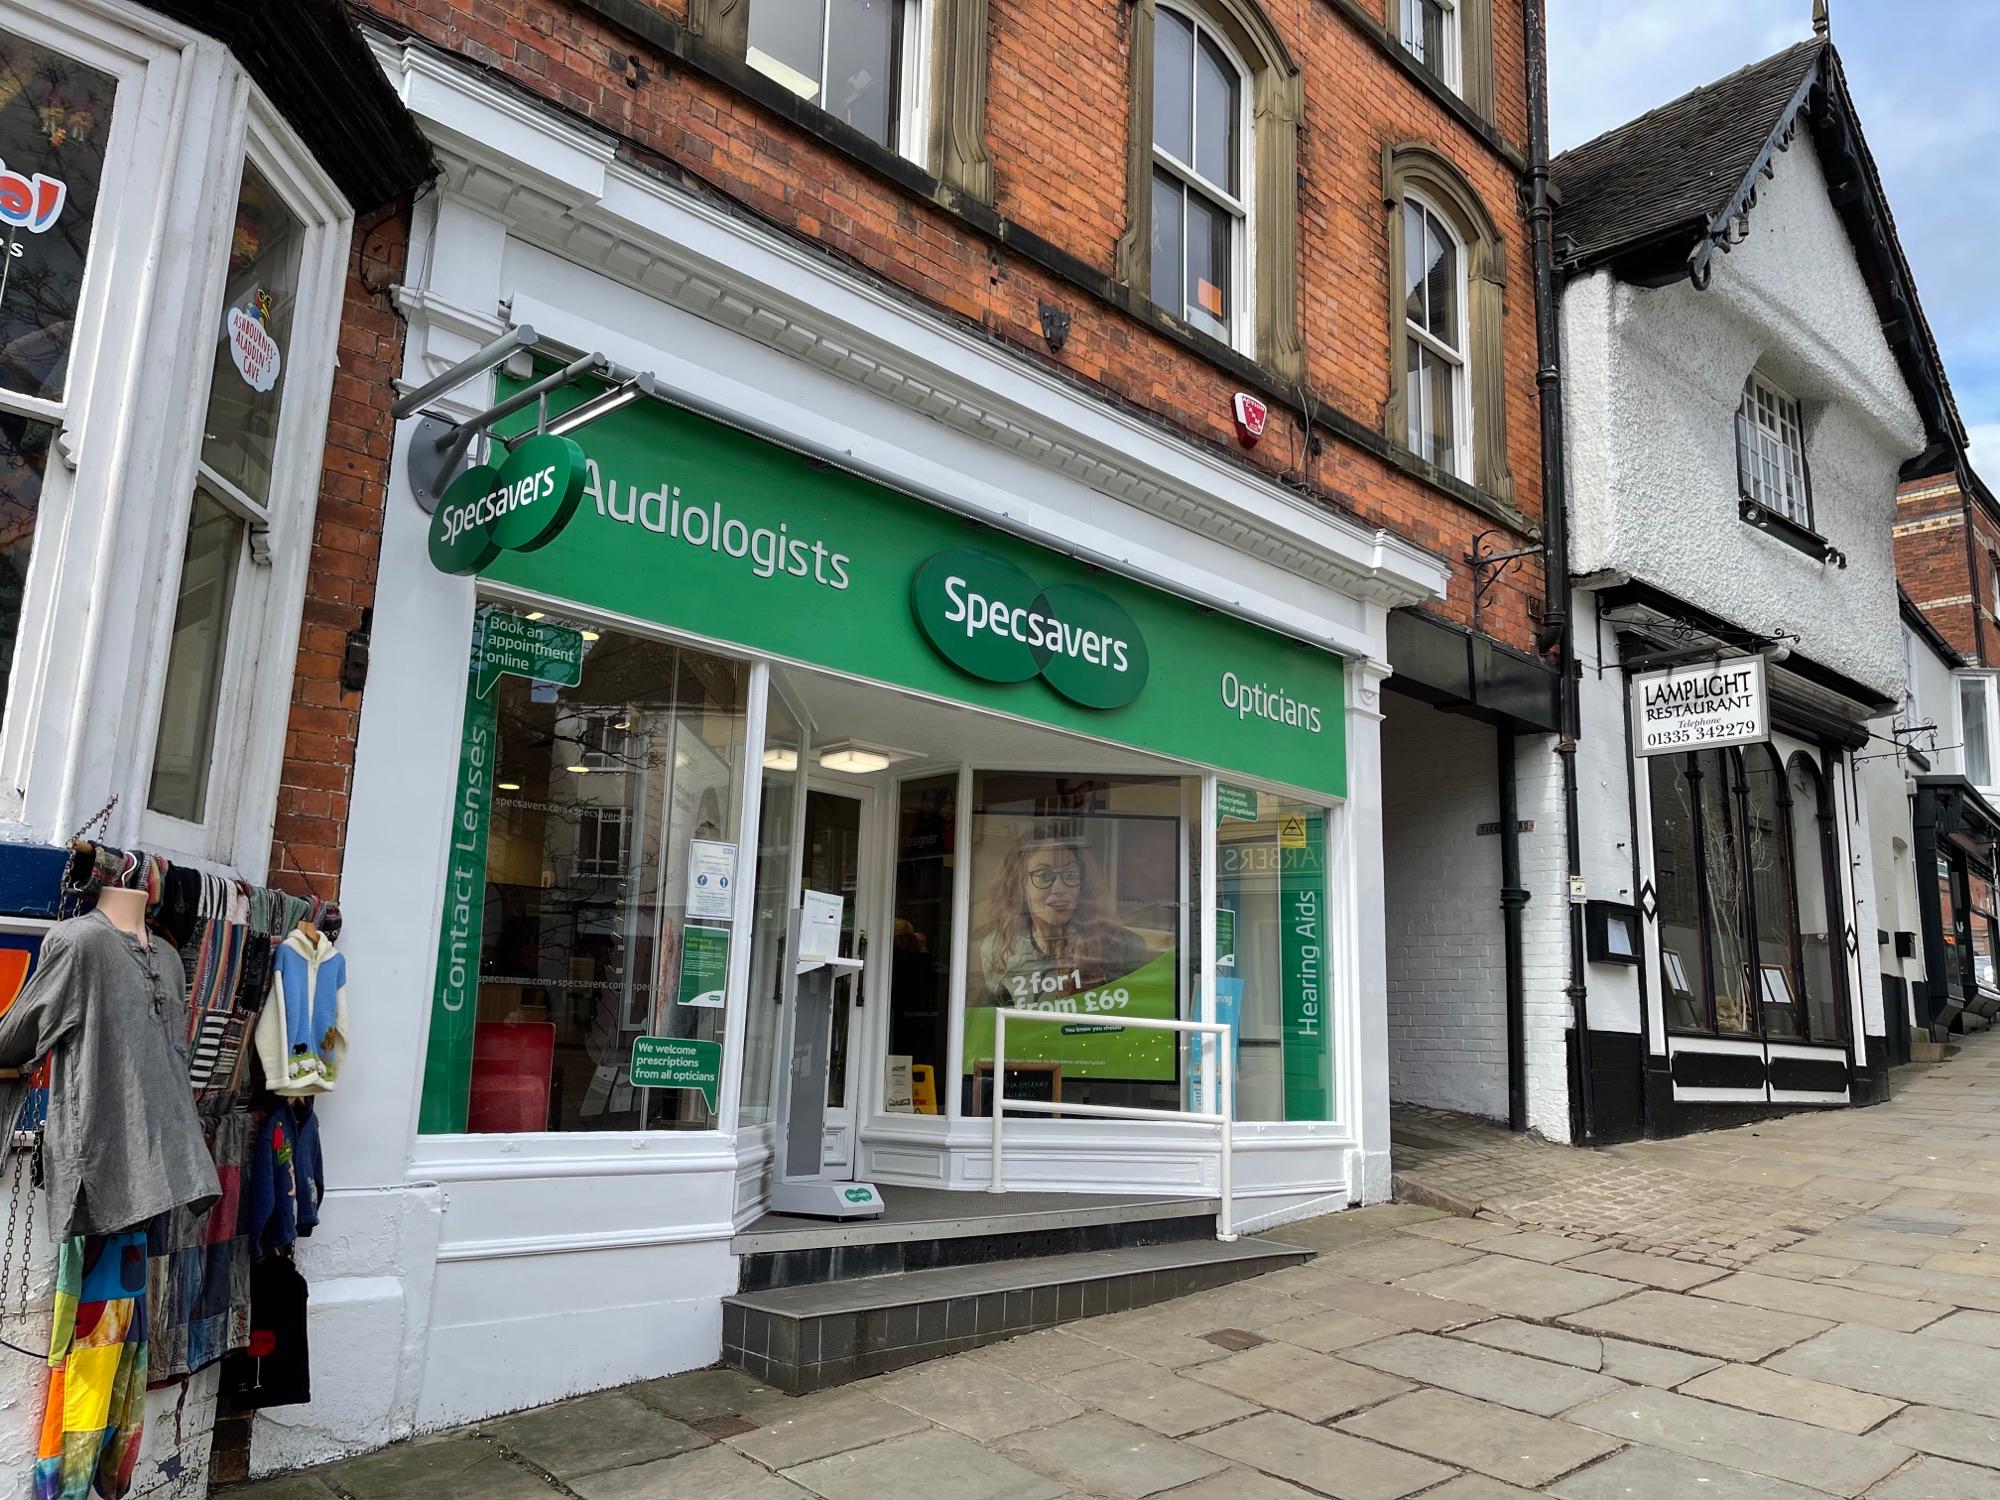 Images Specsavers Opticians and Audiologists - Ashbourne Derby